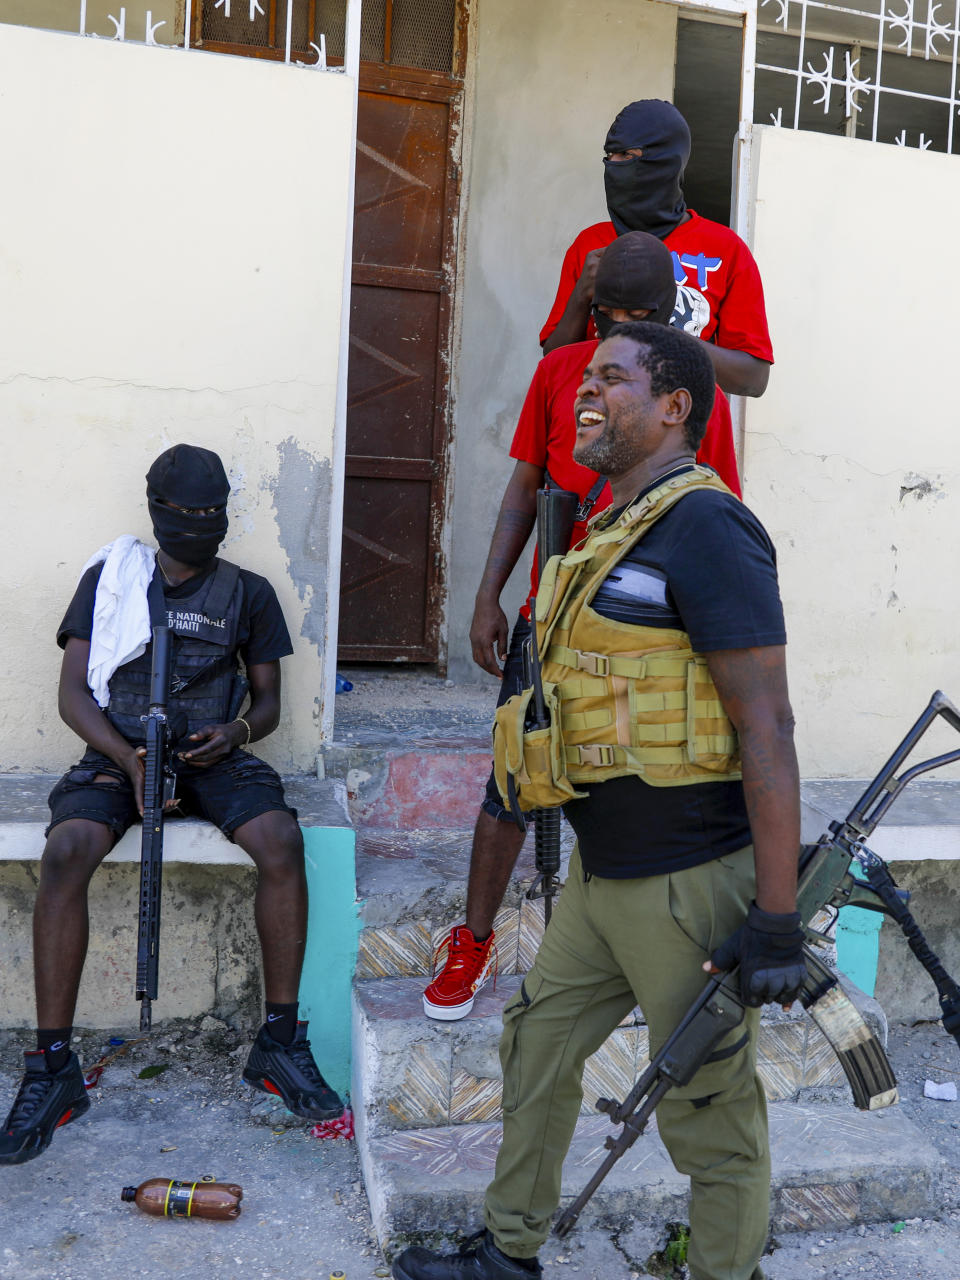 Barbecue, the leader of the "G9 and Family" gang, stands with his gang after speaking to journalists in the Delmas 6 neighborhood of Port-au-Prince in Port-au-Prince, Haiti, Tuesday, March 5, 2024. Haiti's latest violence began with a direct challenge from Barbecue, a former elite police officer, who said he would target government ministers to prevent the prime minister's return and force his resignation. (AP Photo/Odelyn Joseph)